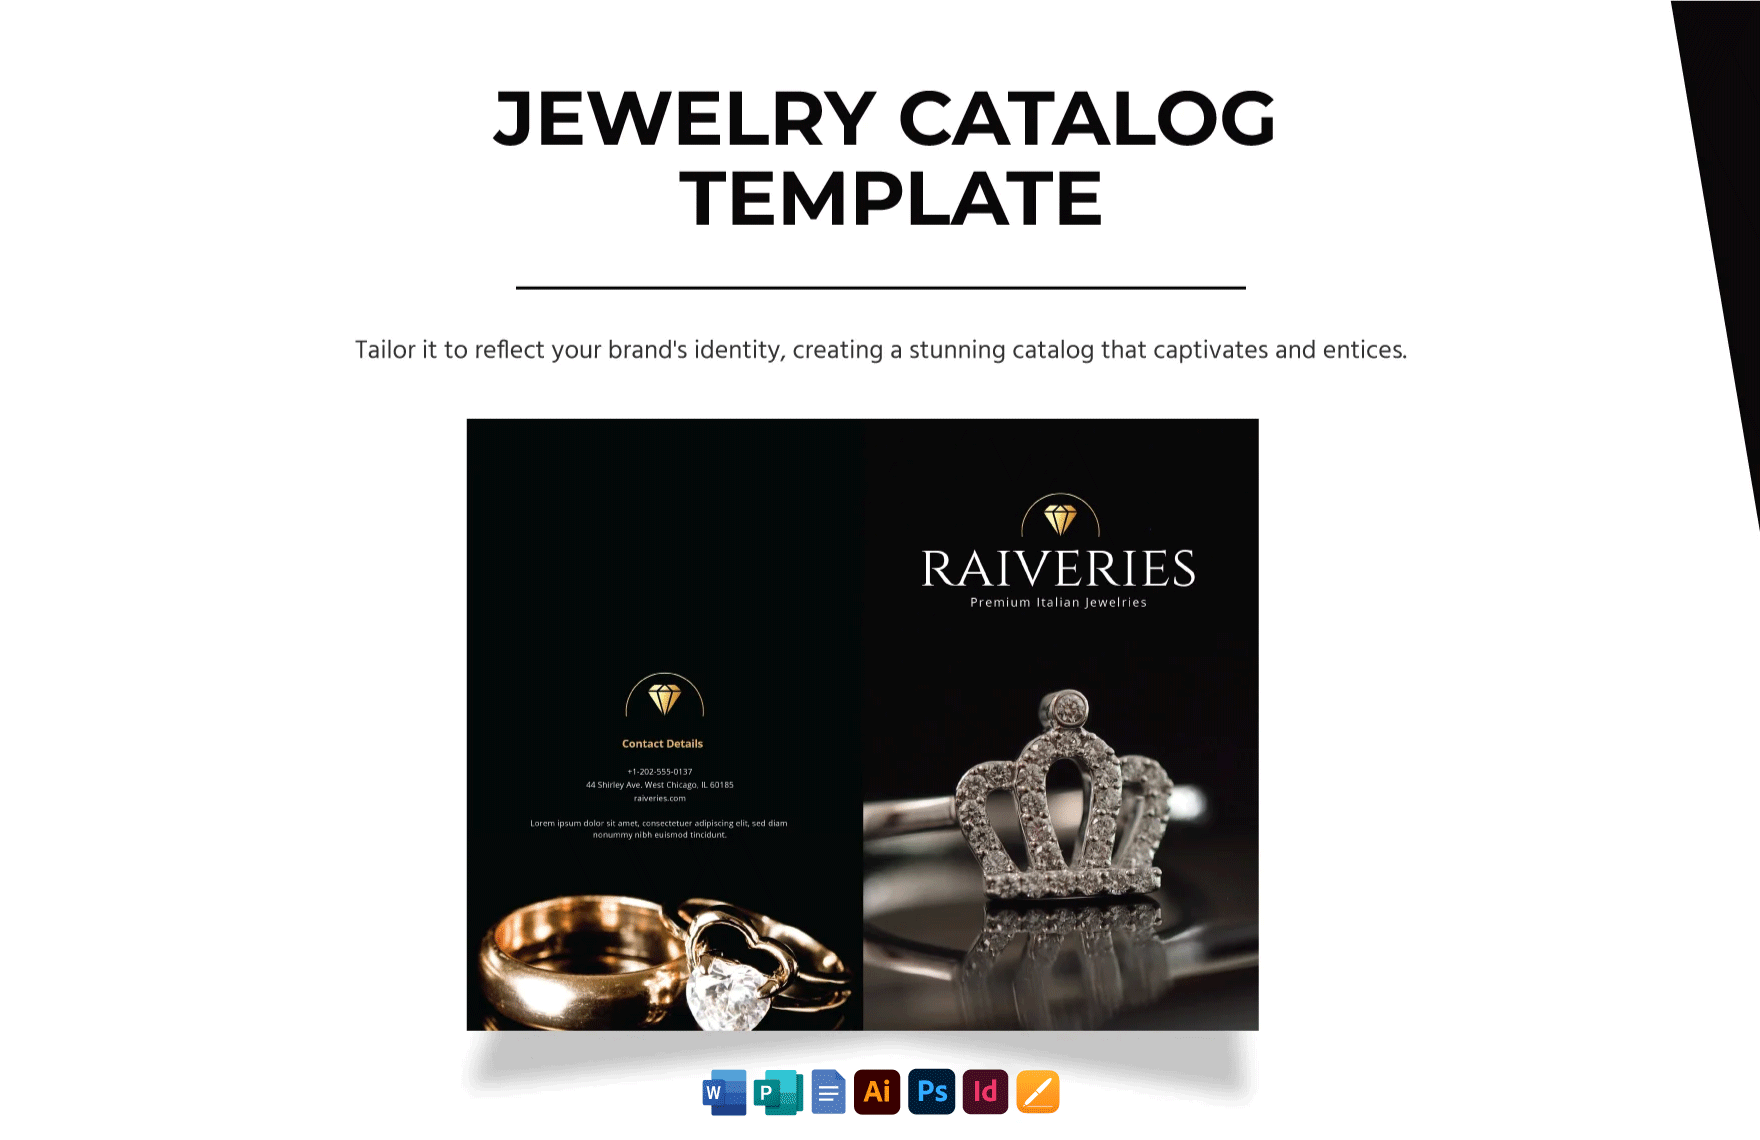 Jewelry Catalog Template in Word, Google Docs, Illustrator, PSD, Apple Pages, Publisher, InDesign